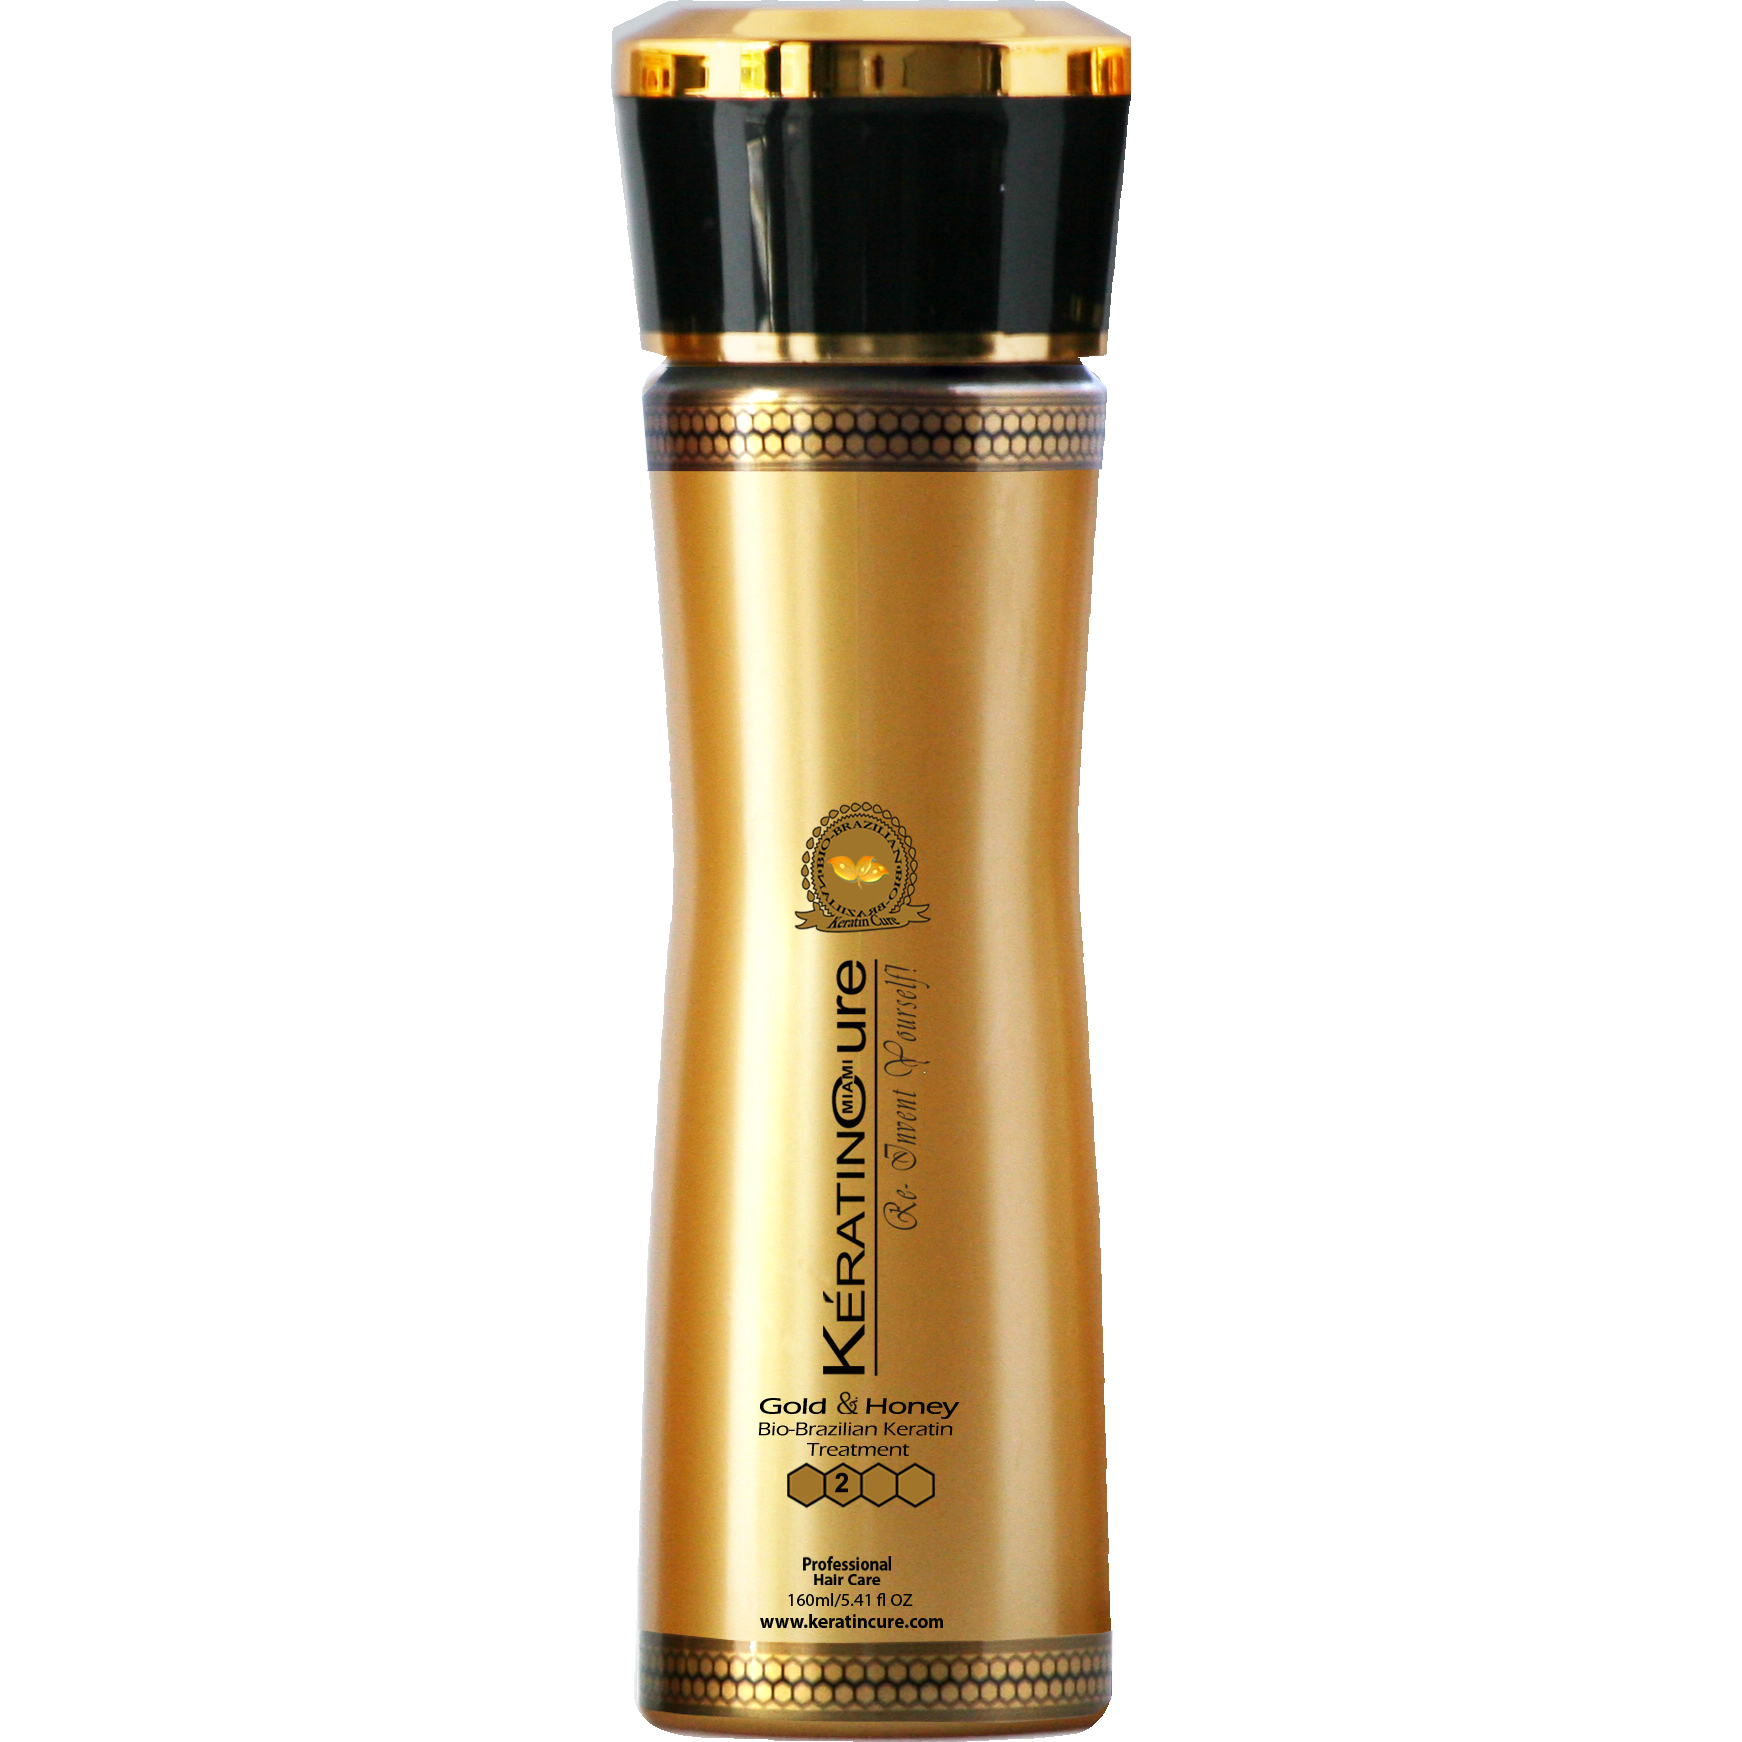 Keratin Cure Gold And Honey Bio Protein Formaldehyde Free Treatment